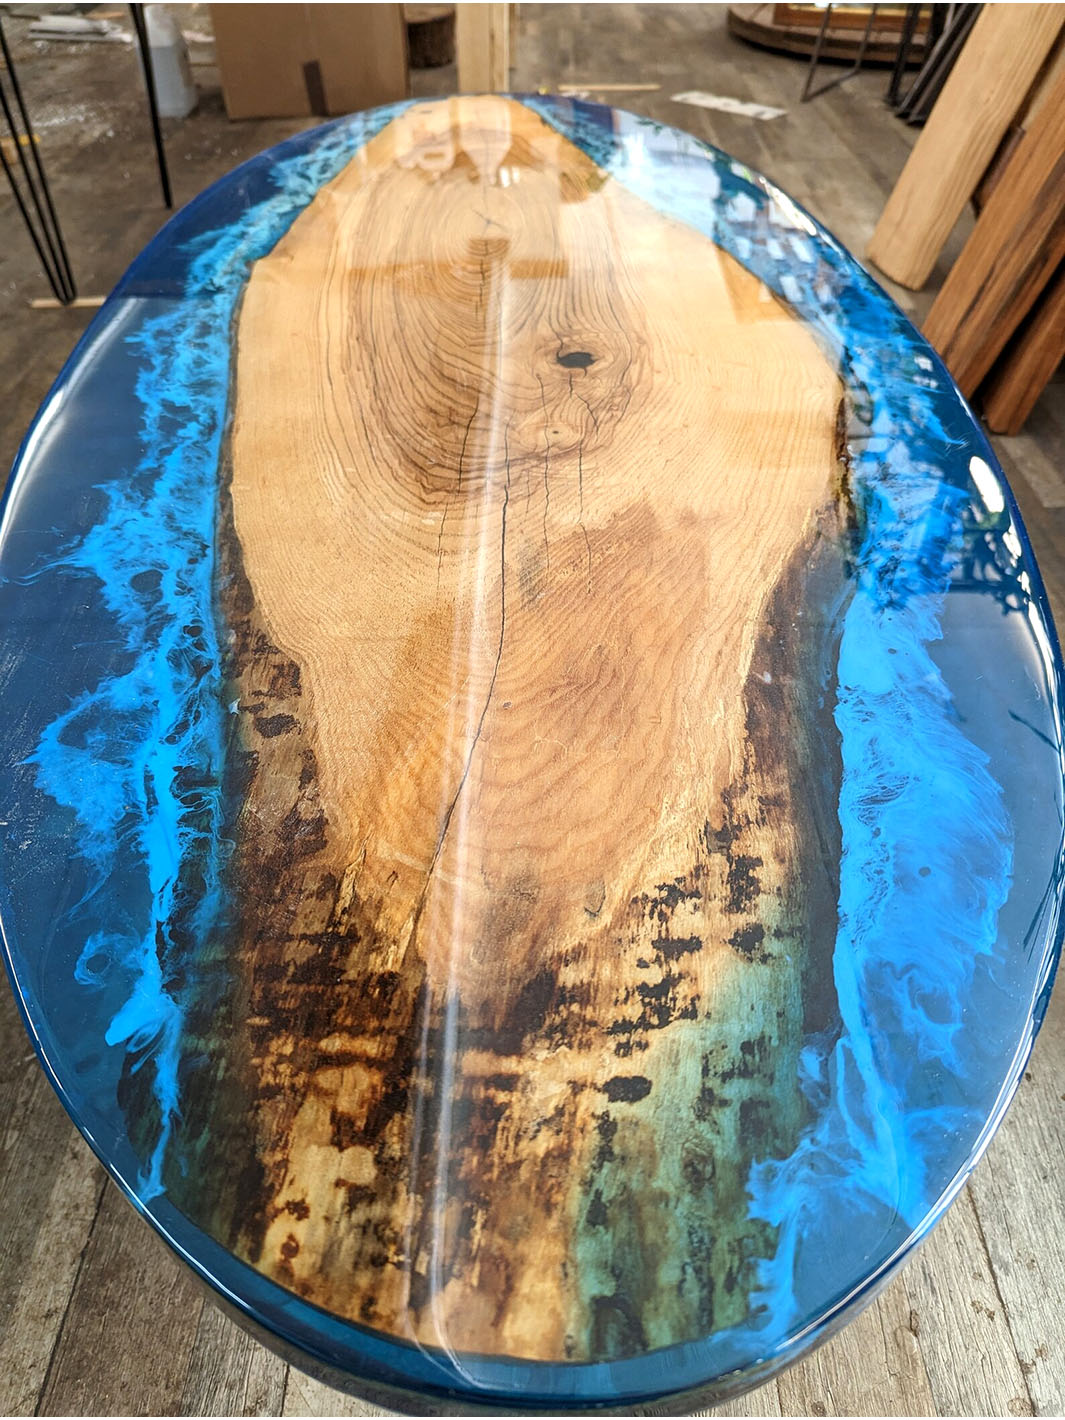 Oval Epoxy Coffee Table With Ocean Epoxy Design